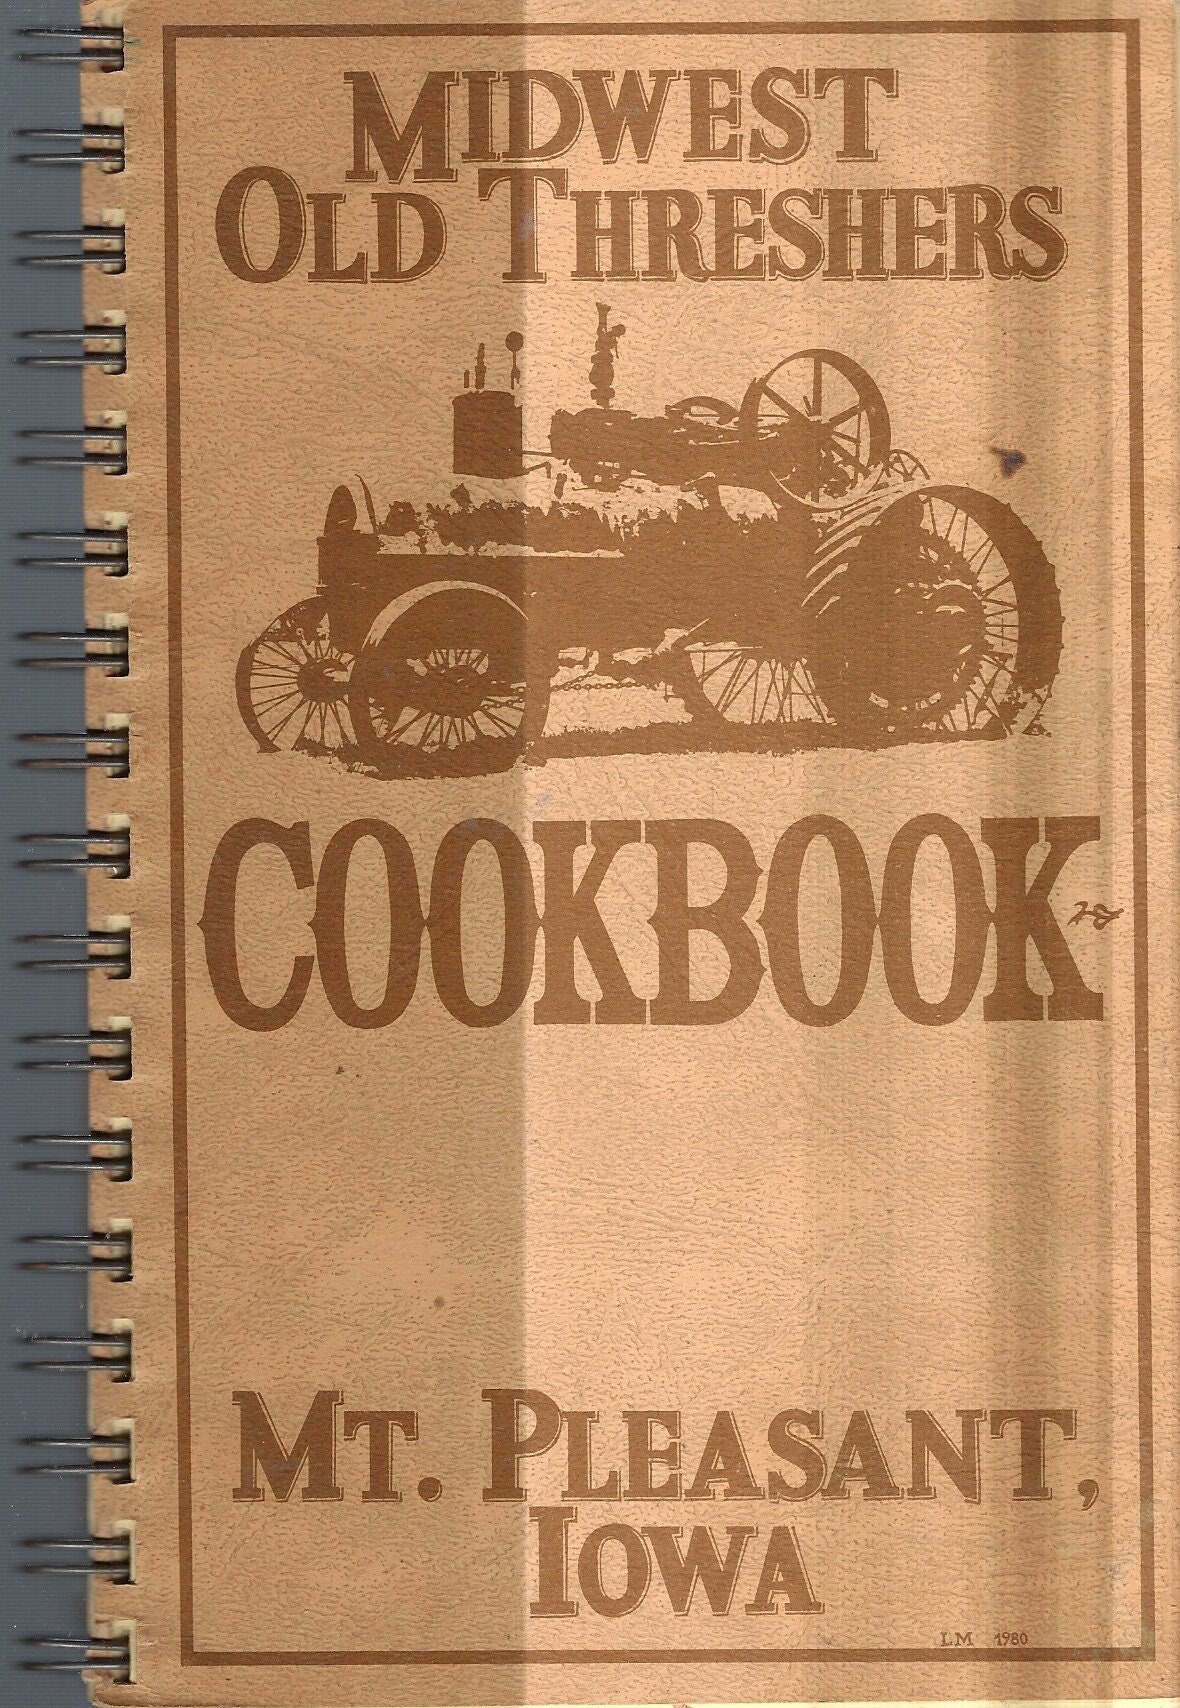 Mt Pleasant Iowa Vintage 1980S Midwest Old Threshers Cookbook Ia Community Favorite Recipes Collectible Spiral Bound Rare Local Cook Book